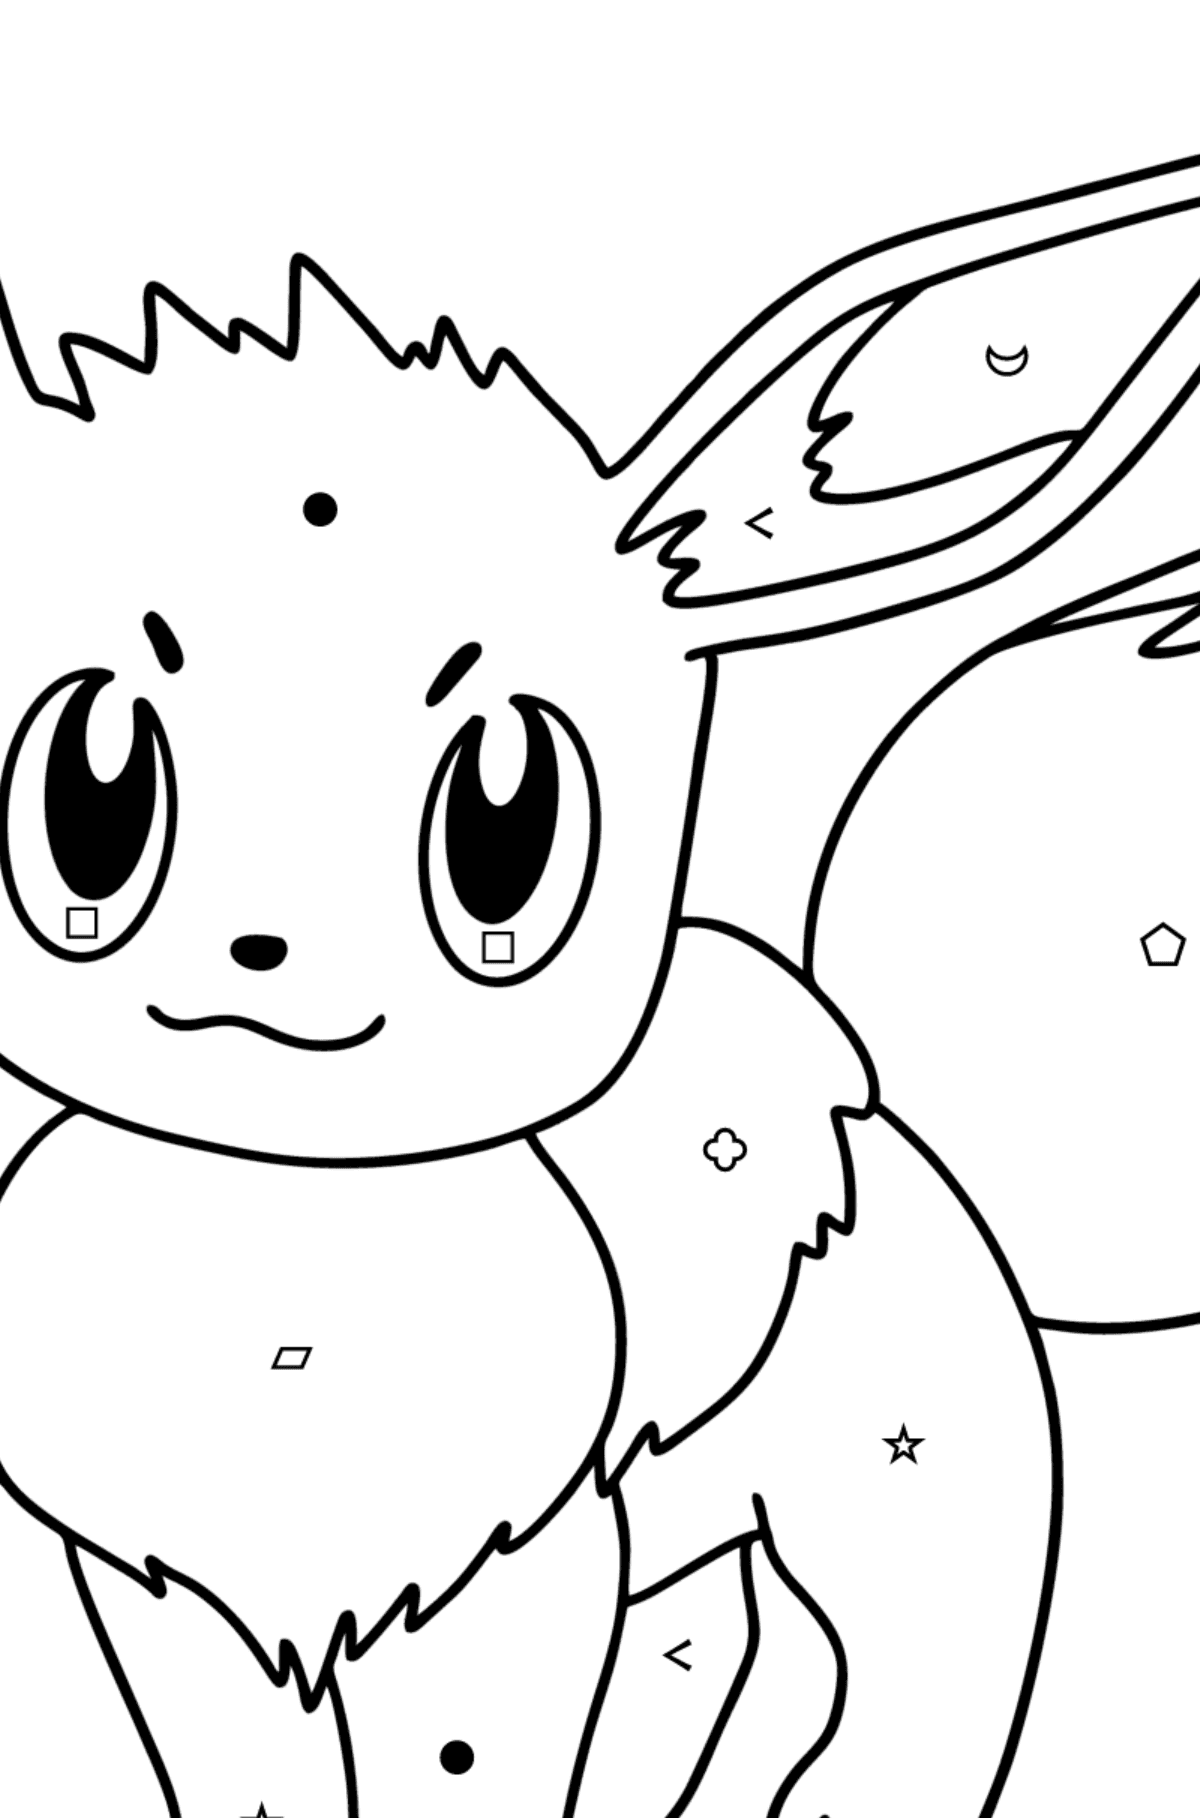 Pokemon Go Eevee coloring page - Coloring by Symbols and Geometric Shapes for Kids